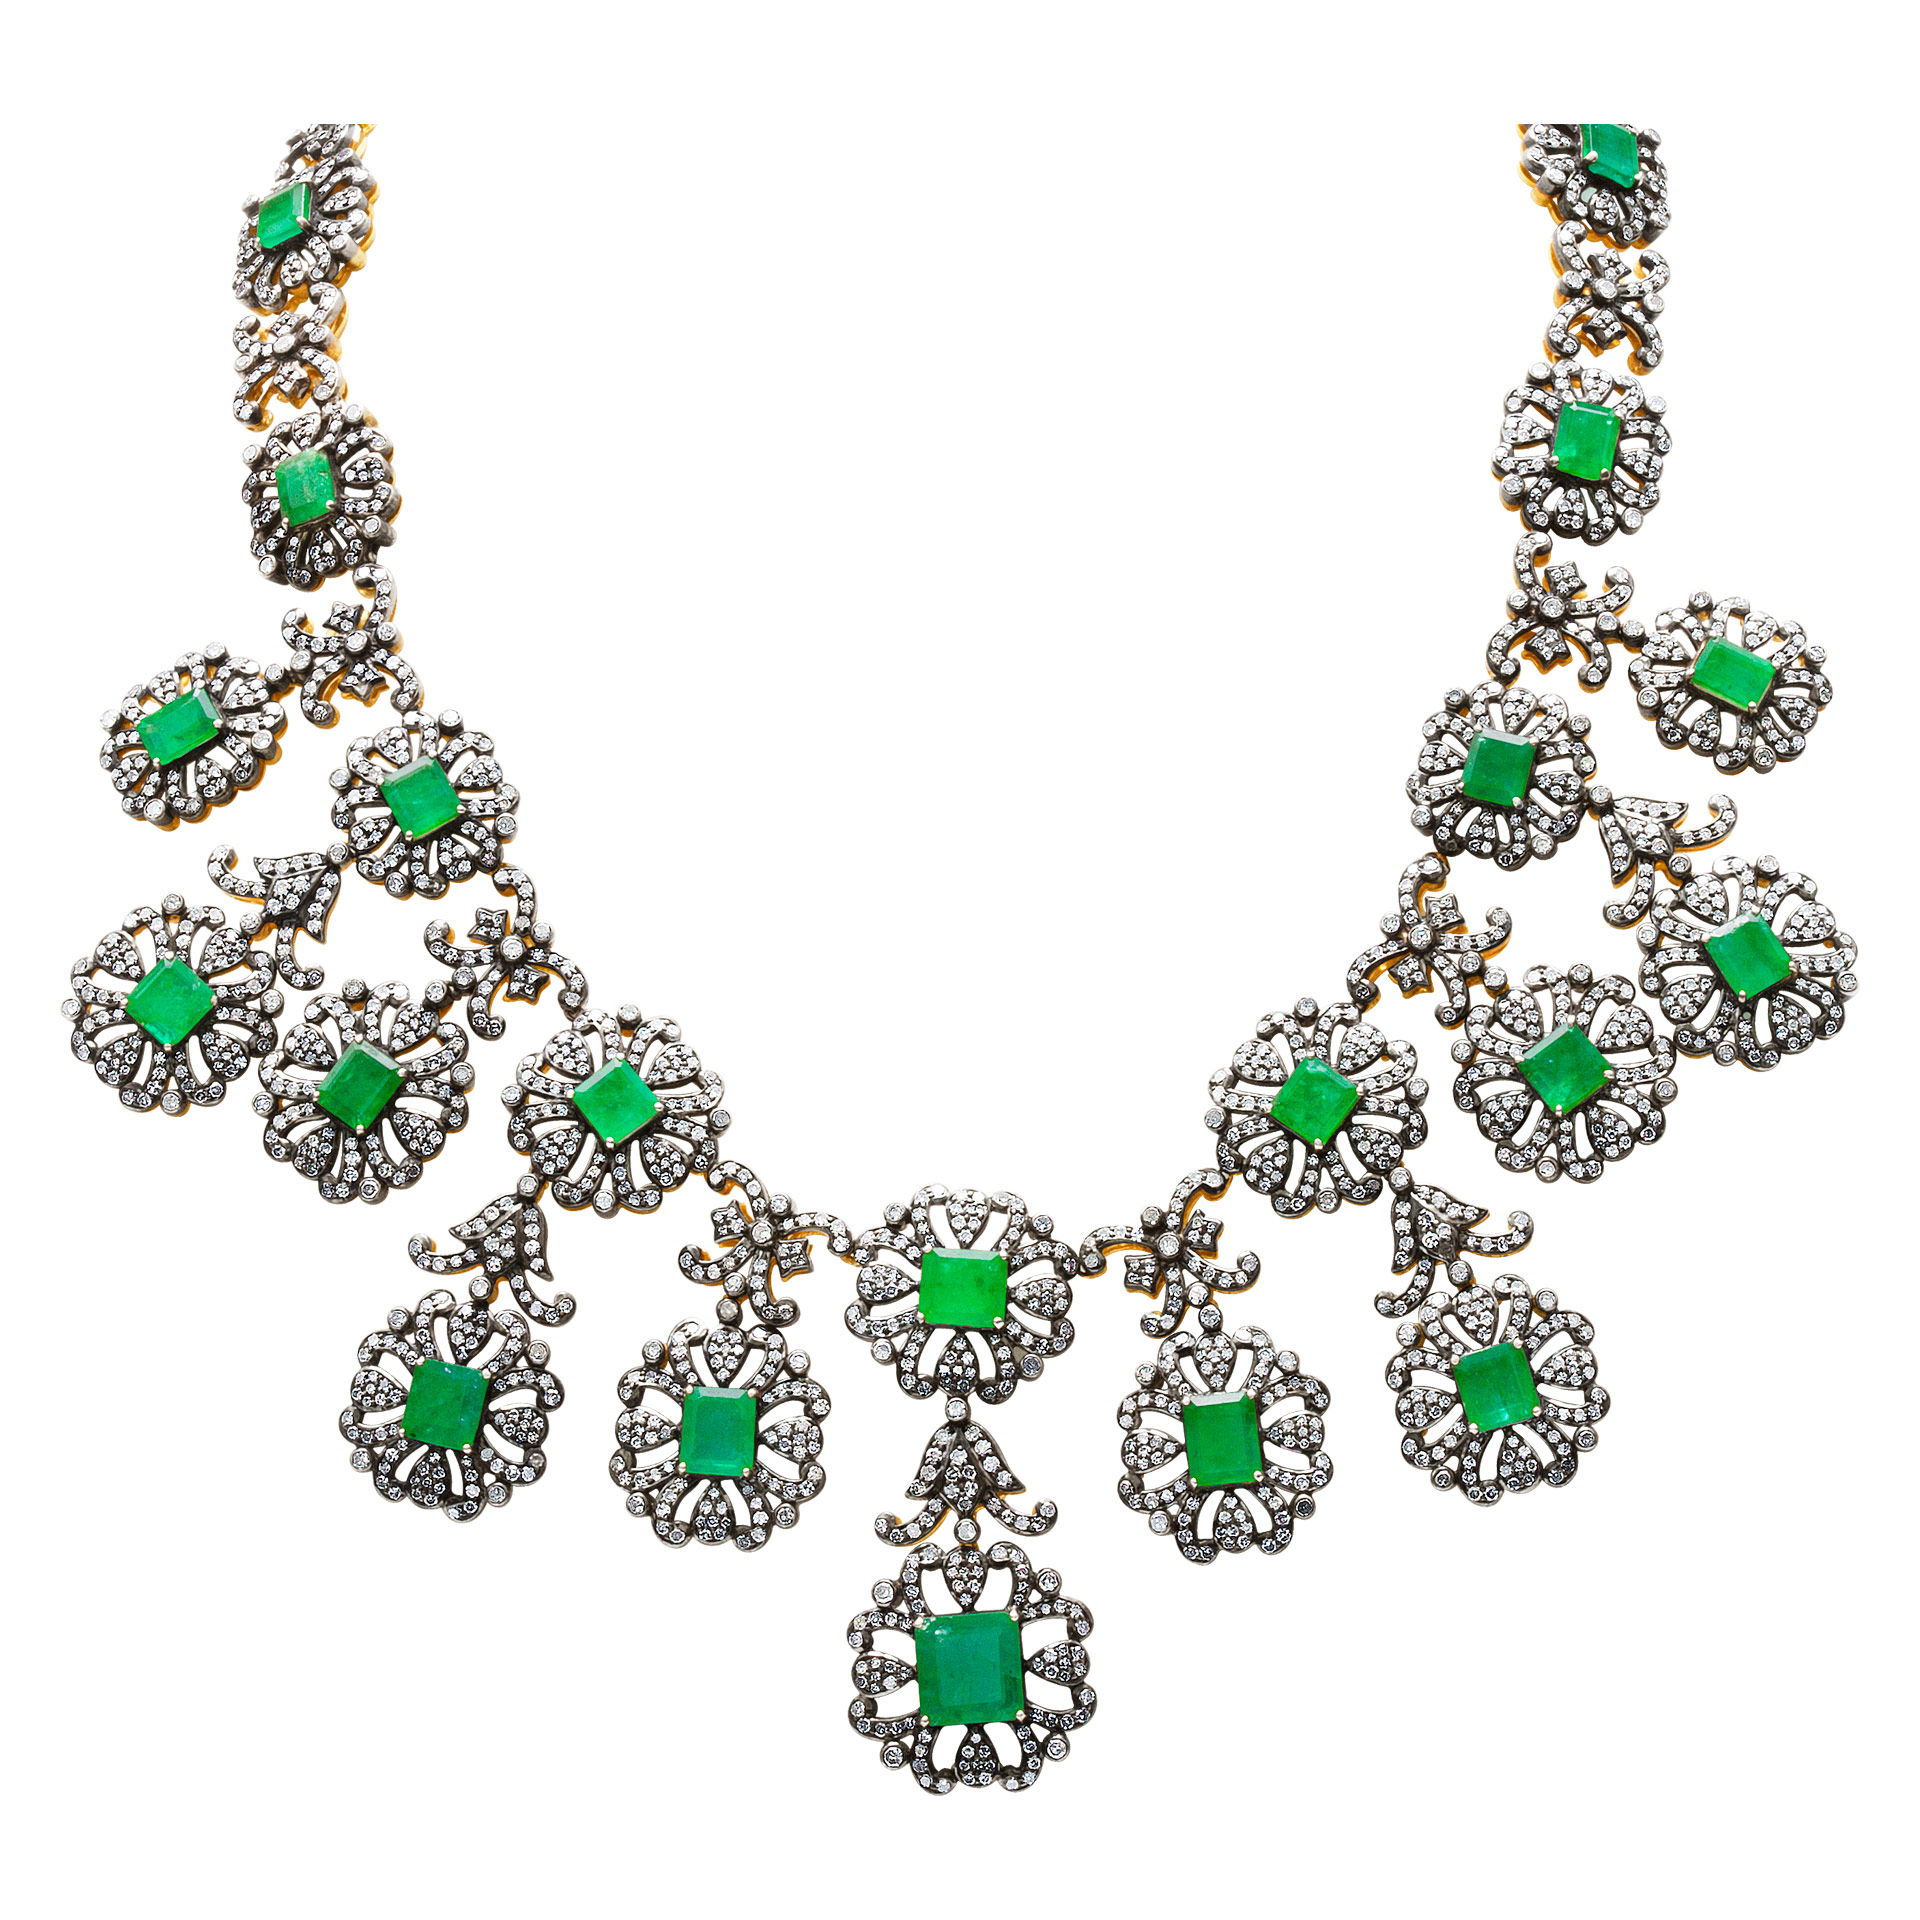 Emerald & rose cut diamond bib necklace in 14k with silver top, 21.24 cts in diamonds & 33.37 cts  in emeralds